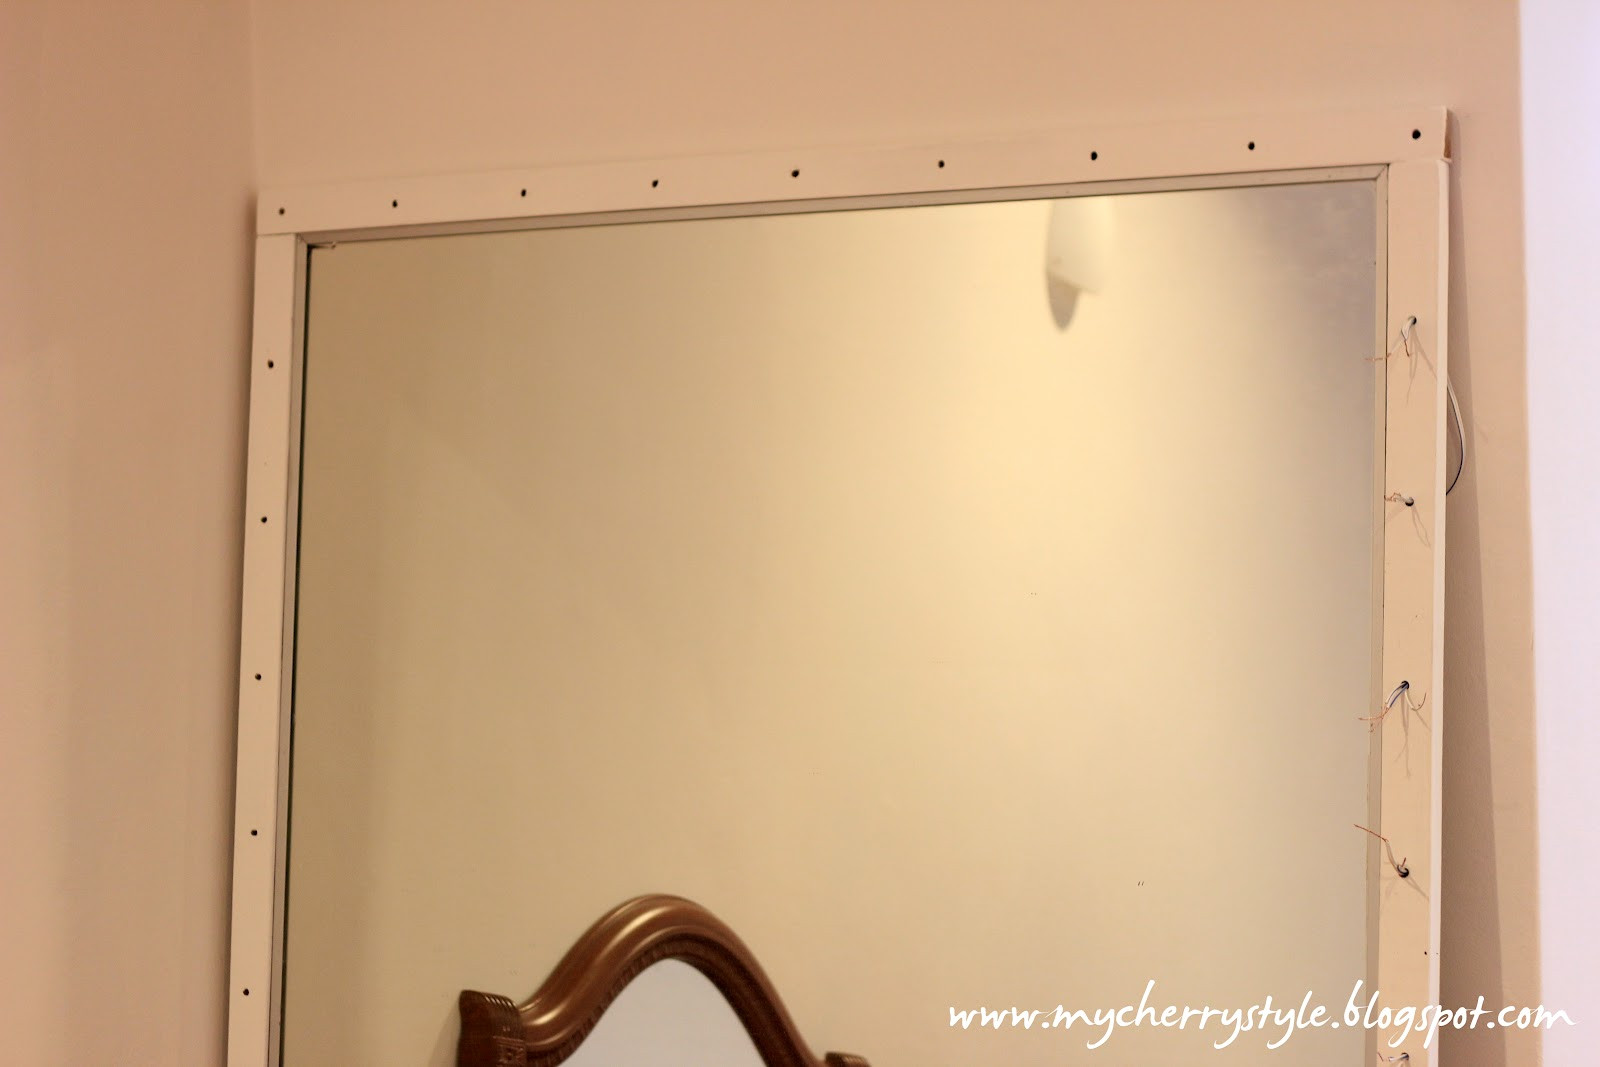 Hollywood Vanity Mirror DIY
 DIY Hollywood style mirror with lights Tutorial from